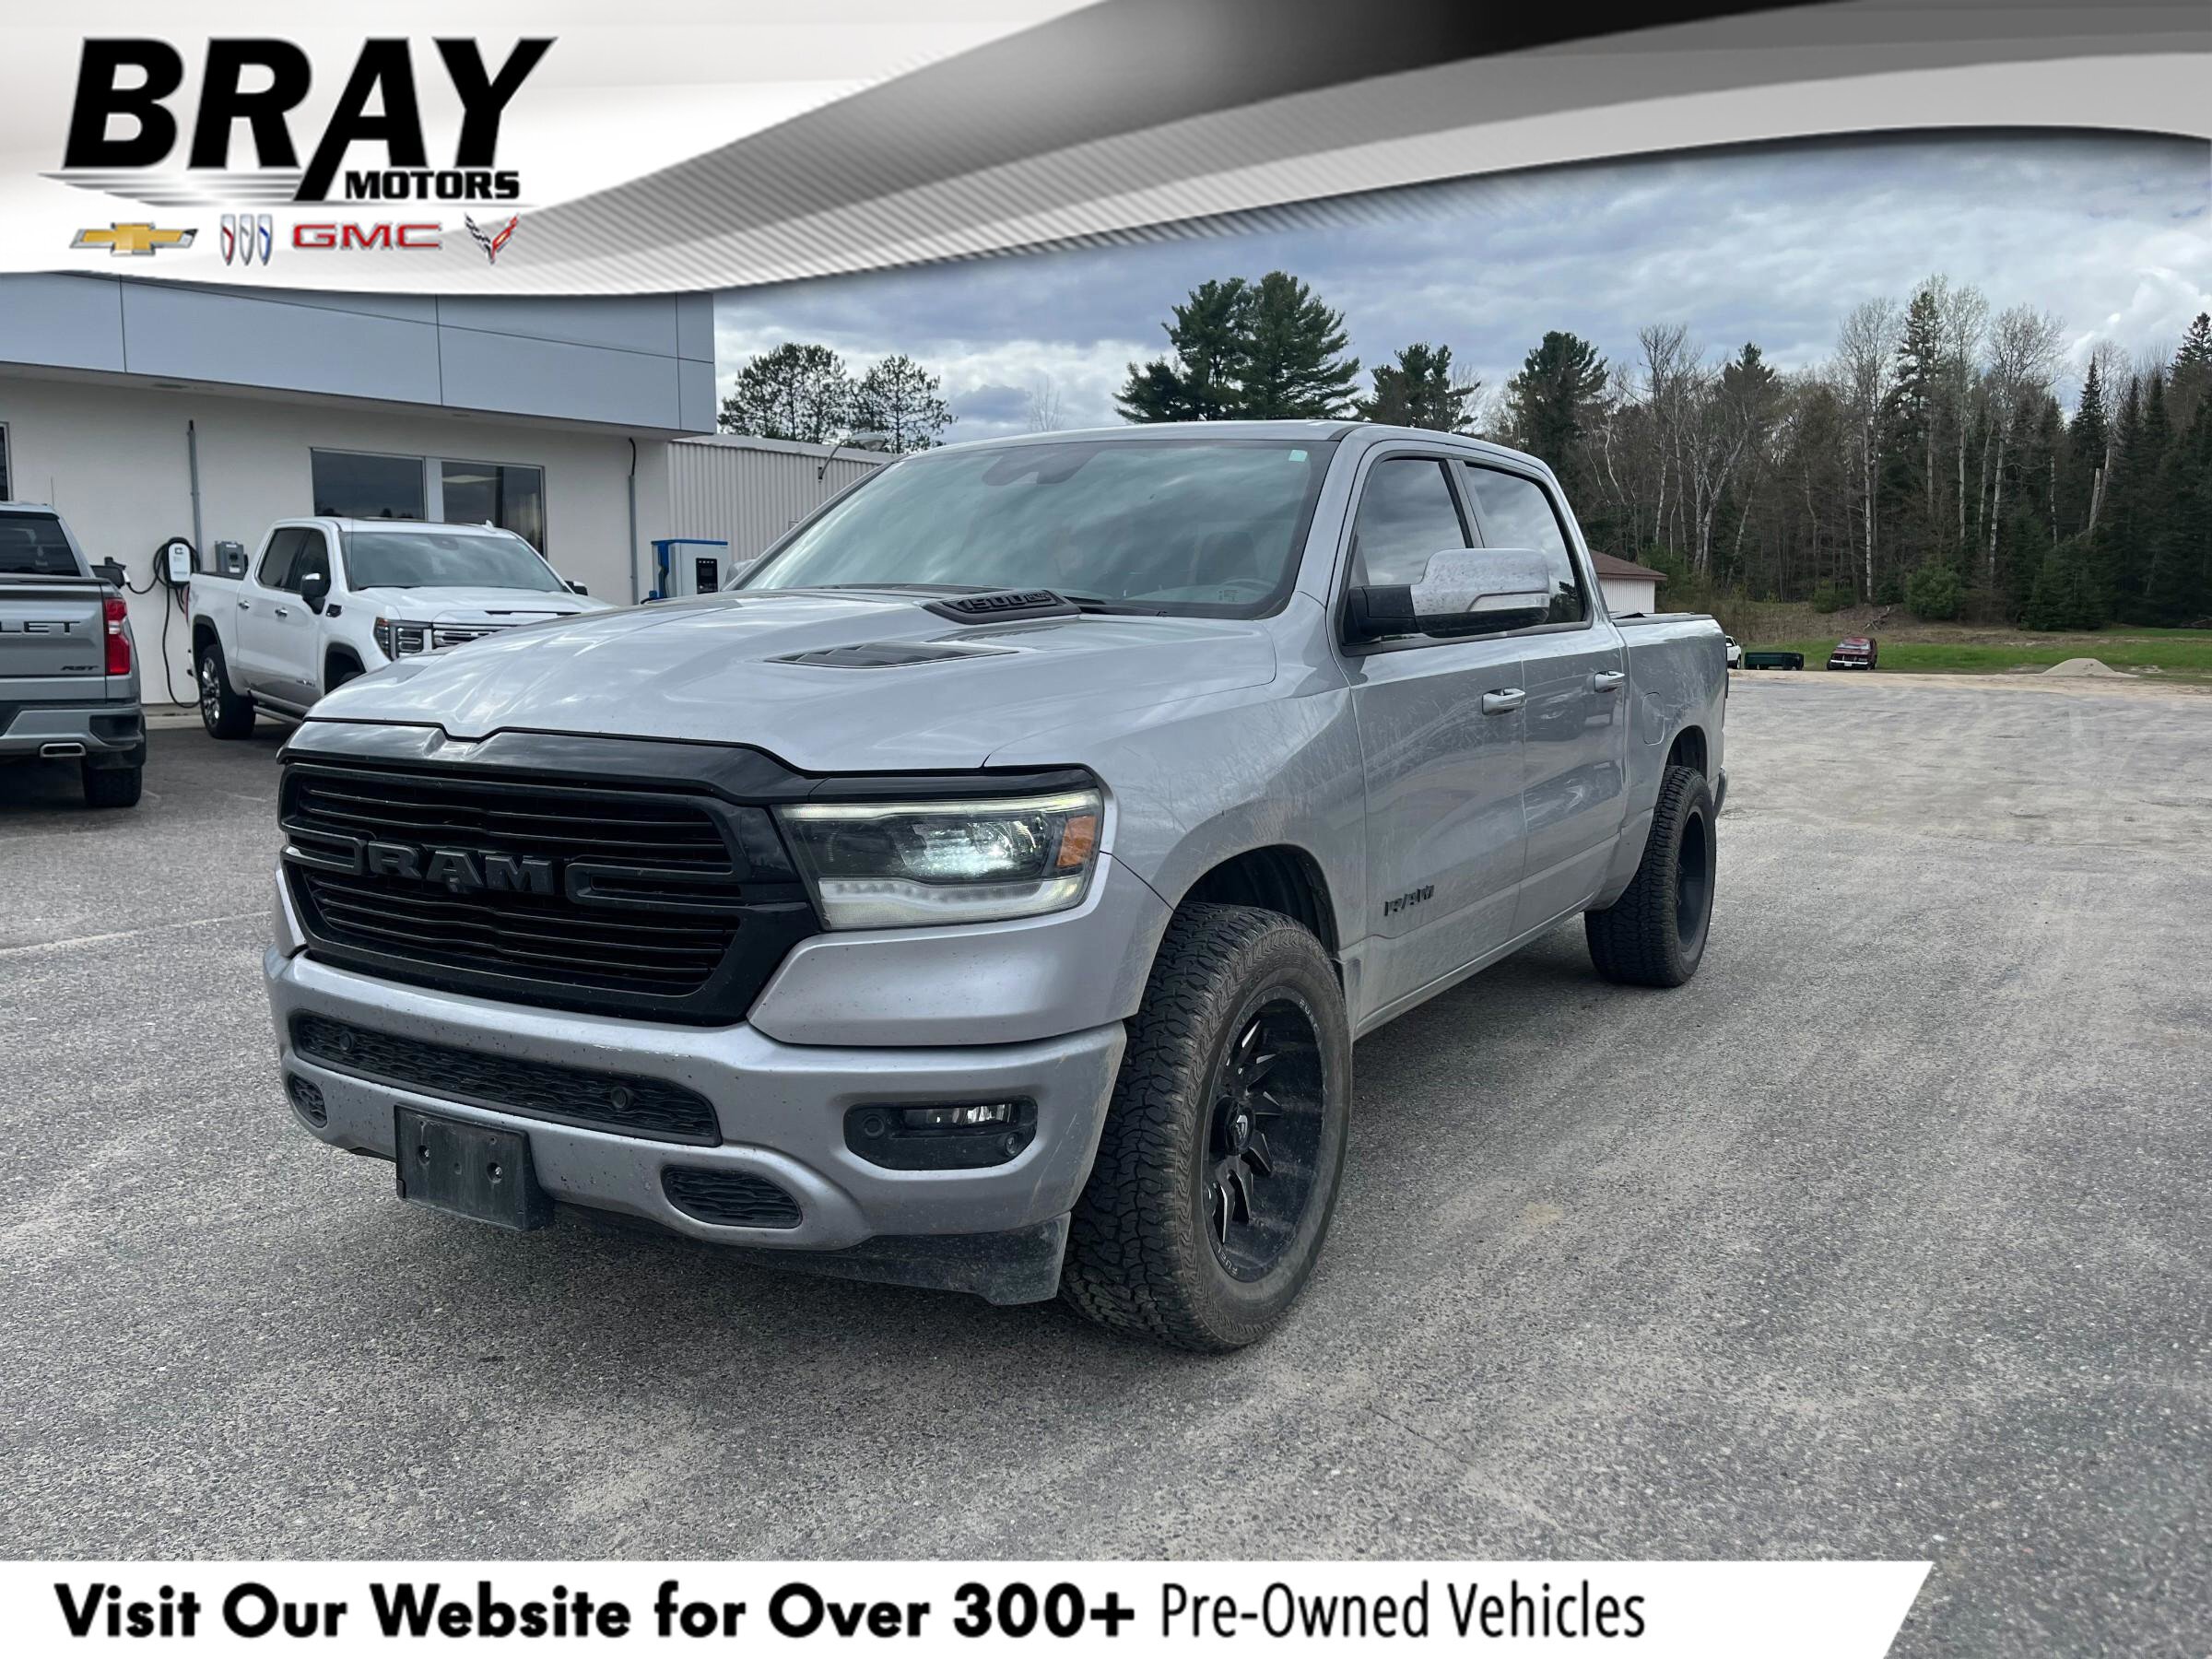 2020 Ram 1500 CERTIFIED PREOWNED | 1-OWNER | CLEAN CARFAX